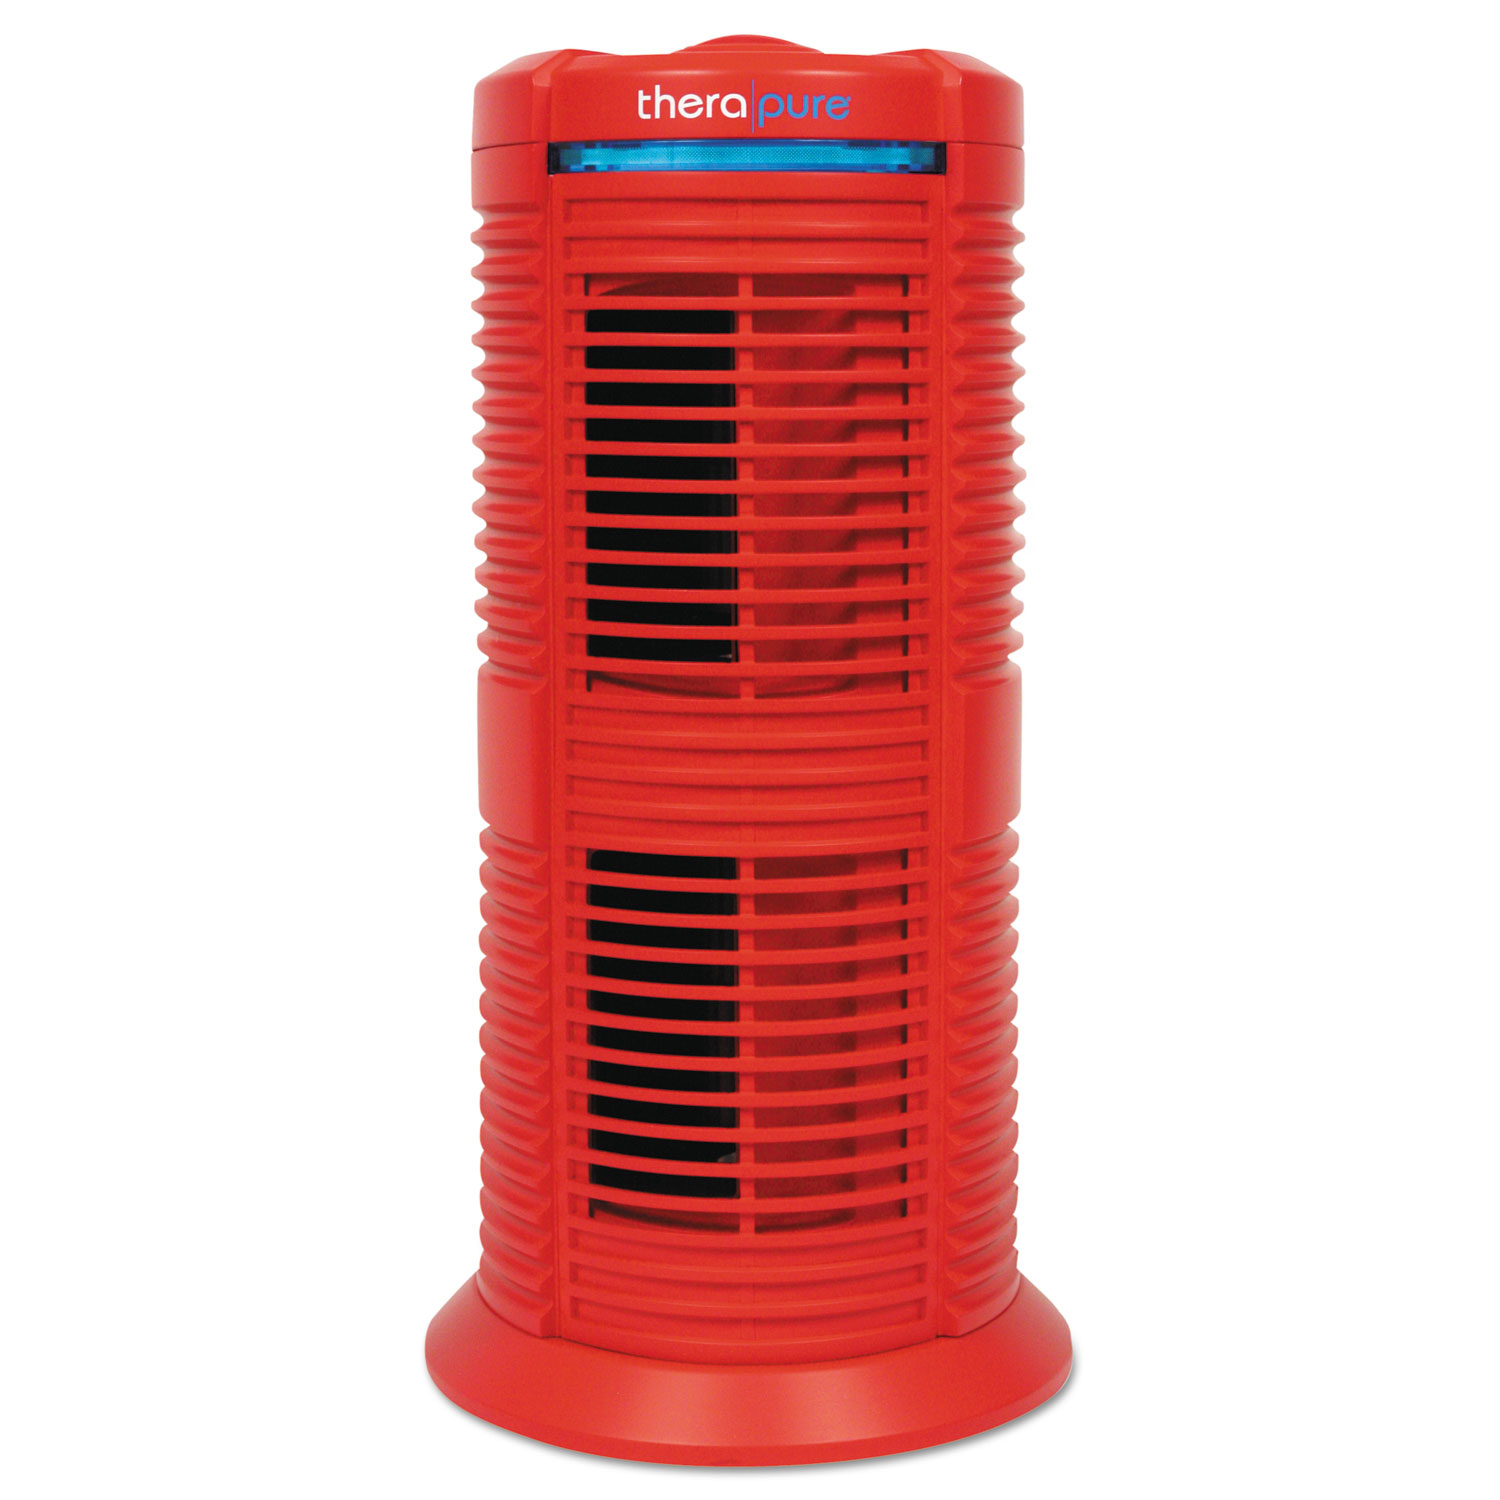  Therapure 90TP220TRD1W TPP220M HEPA-Type Air Purifier, 70 sq ft Room Capacity, Red (ION90TP220TRD1W) 